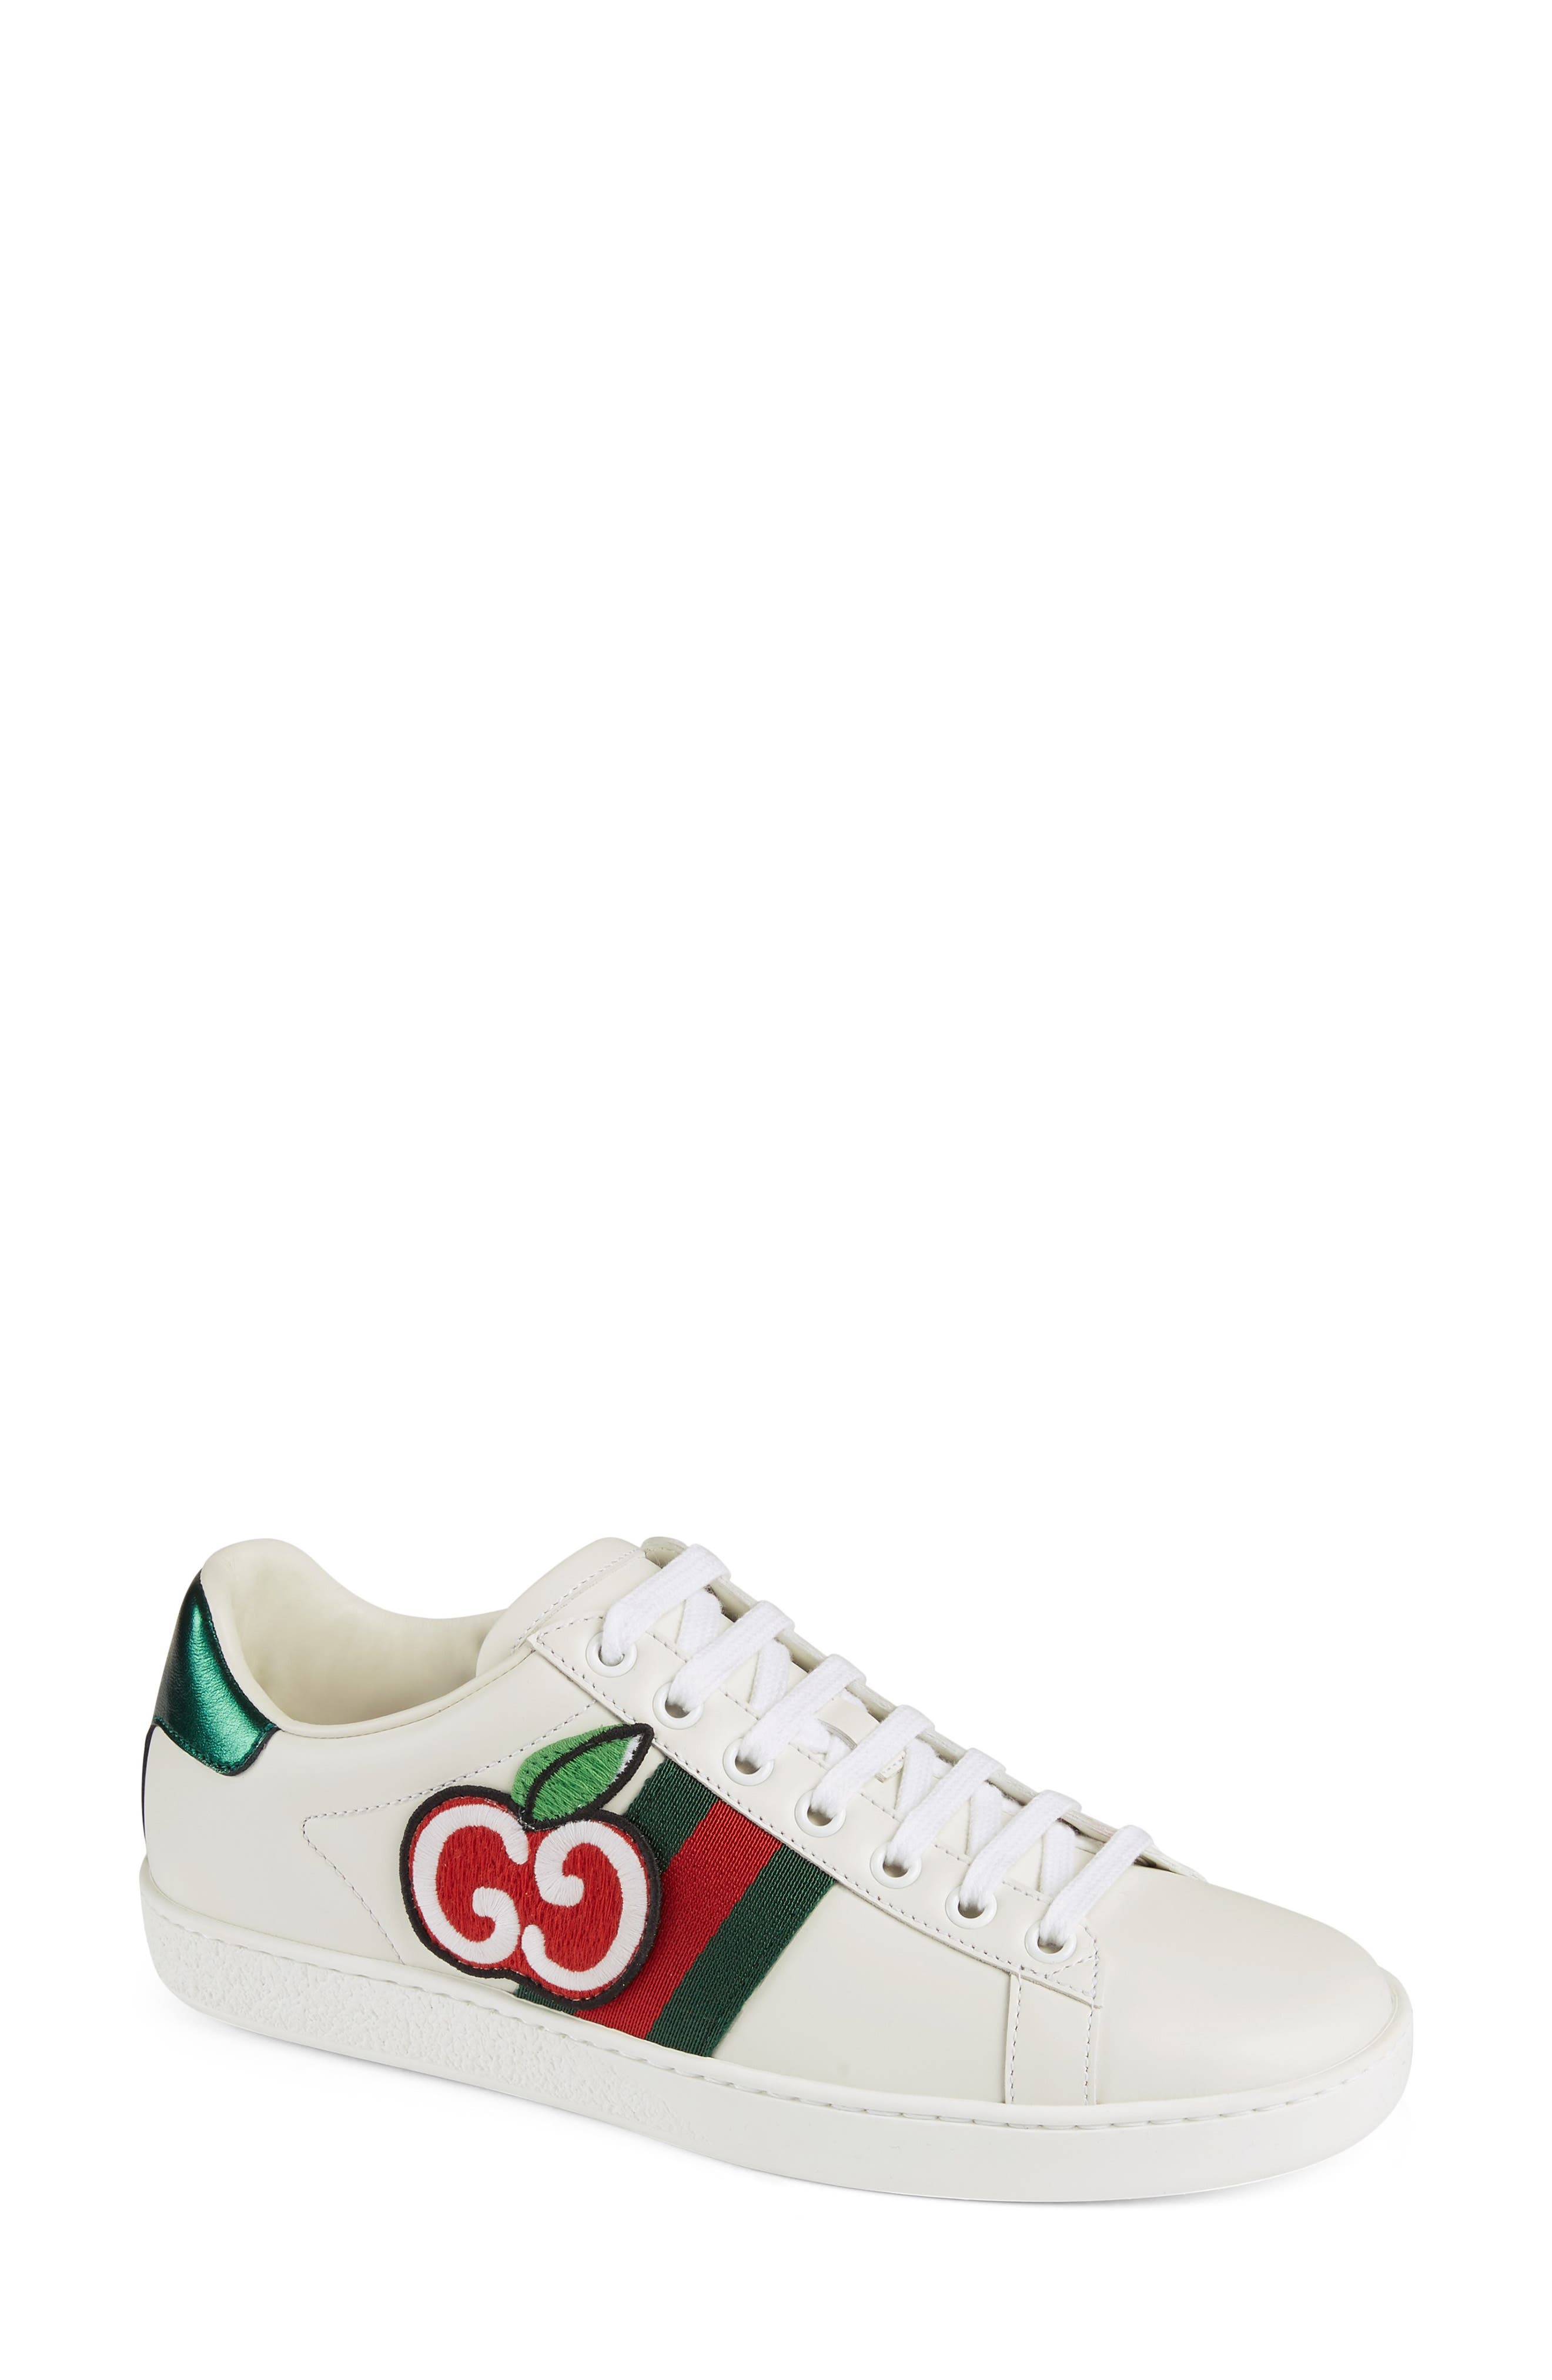 gucci sneaker shoes price